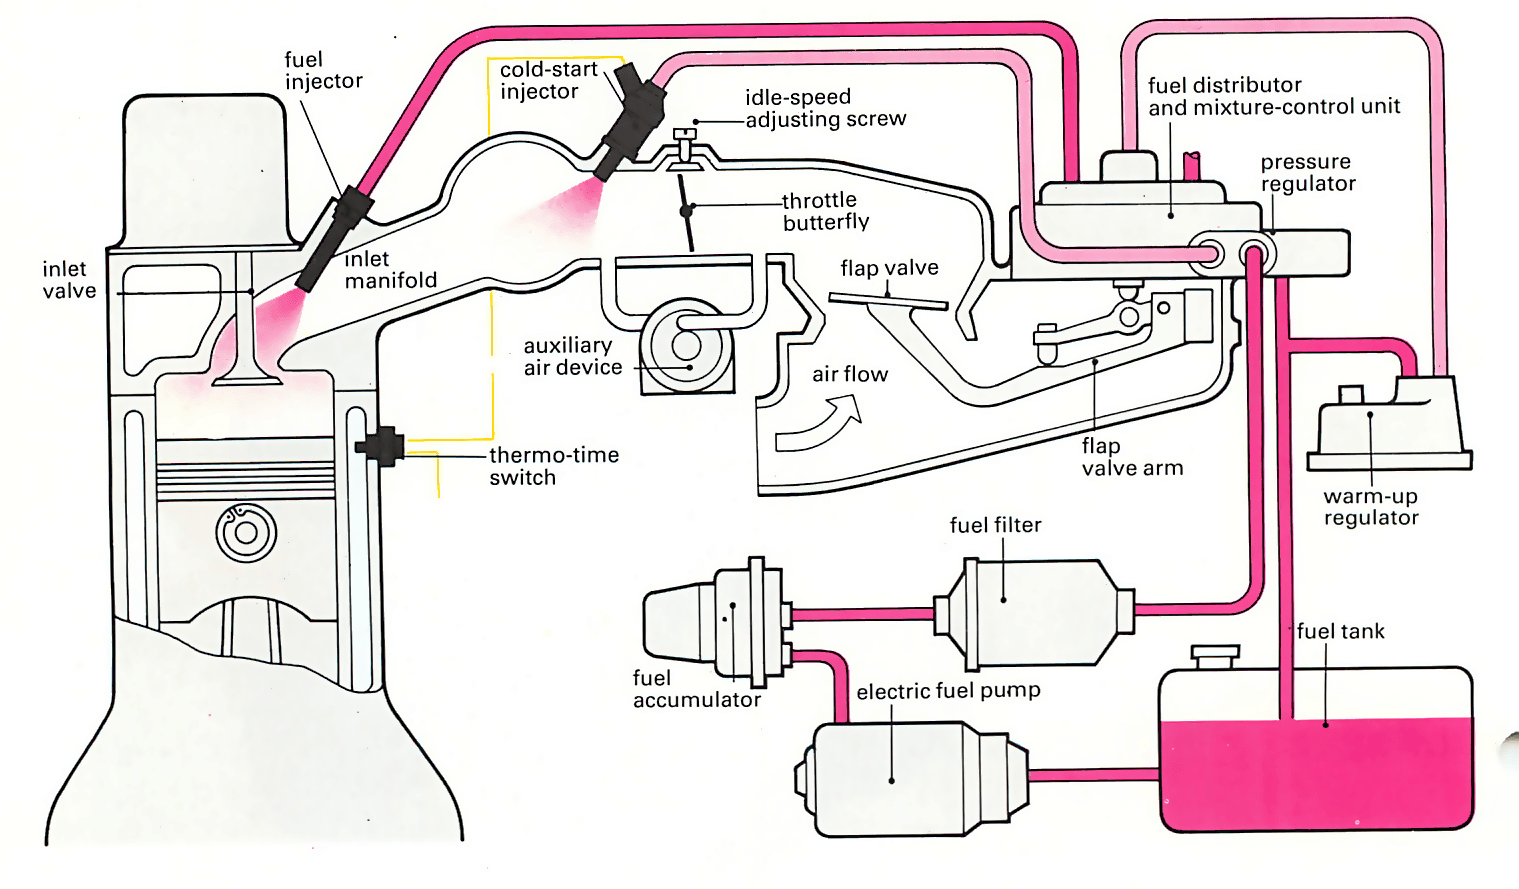 Lucas mechanical fuel injection system